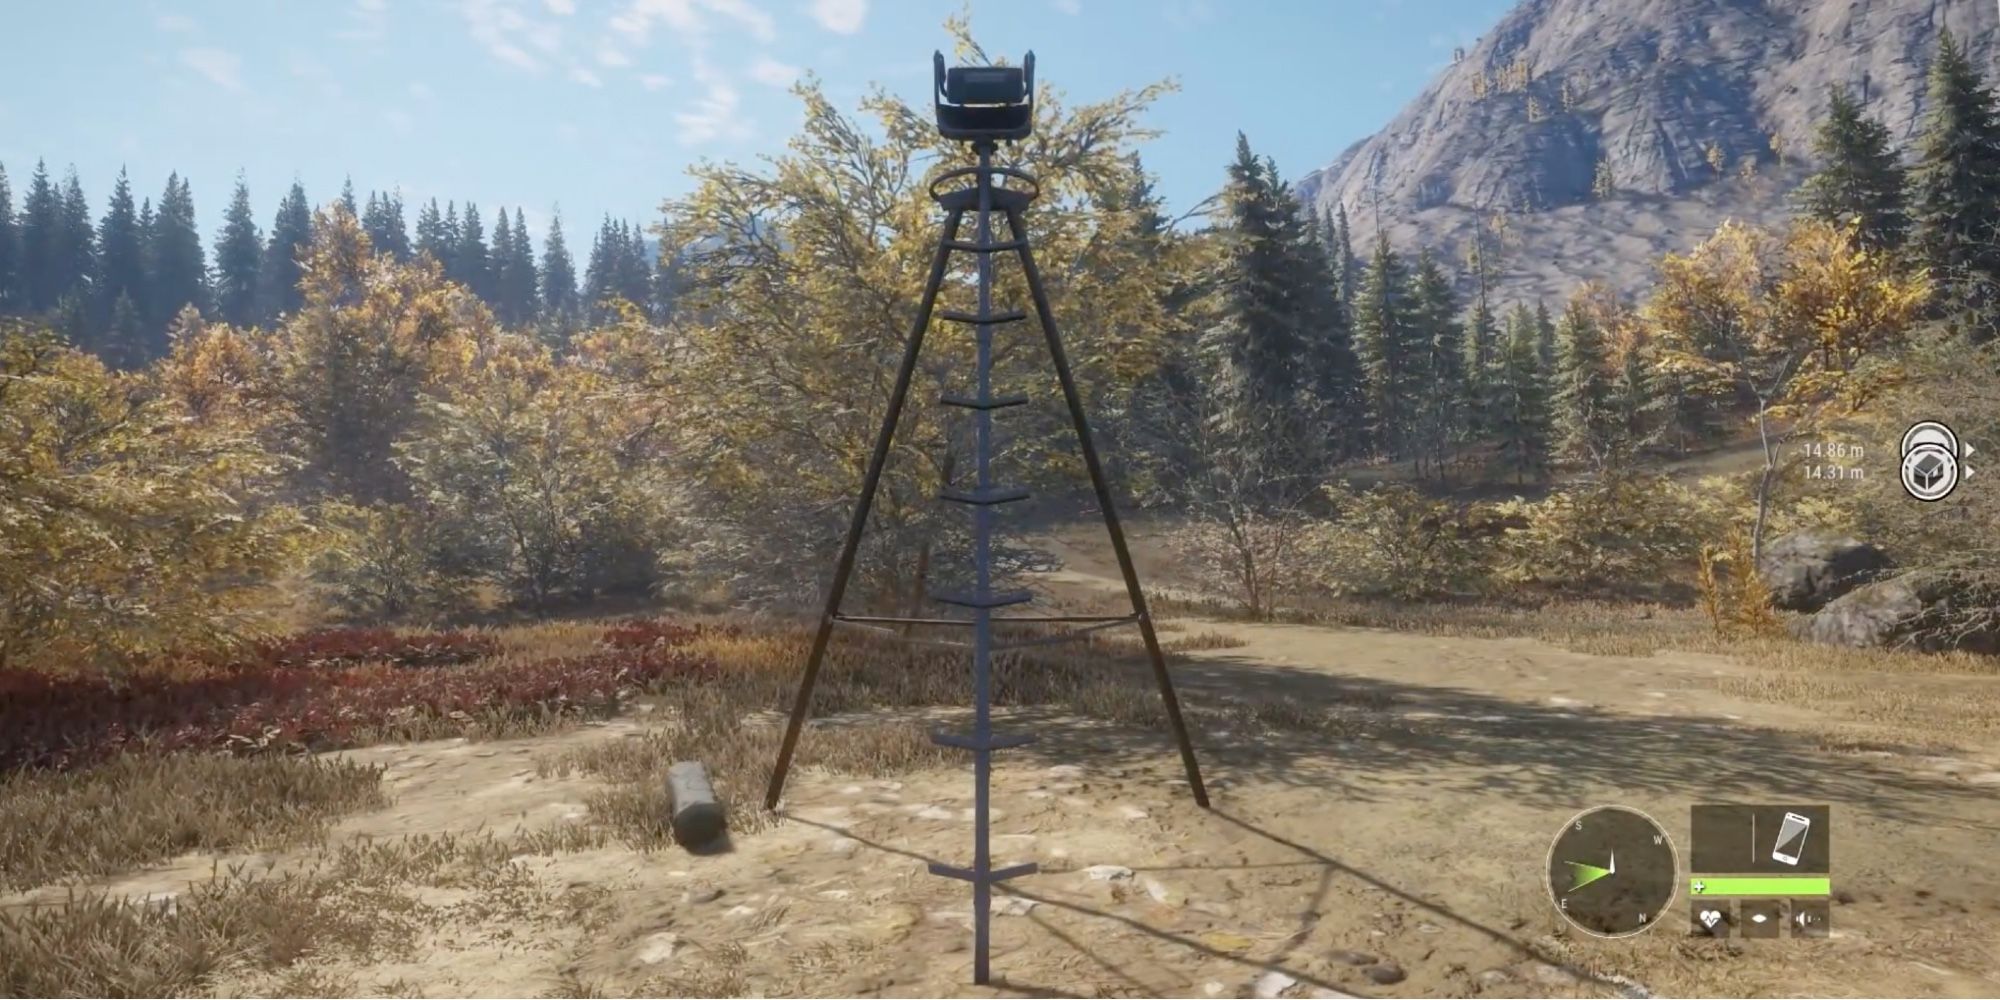 TheHunter - Call of the Wild - Setup Tripod Stands Across The Map - Player places a tripod on the ground